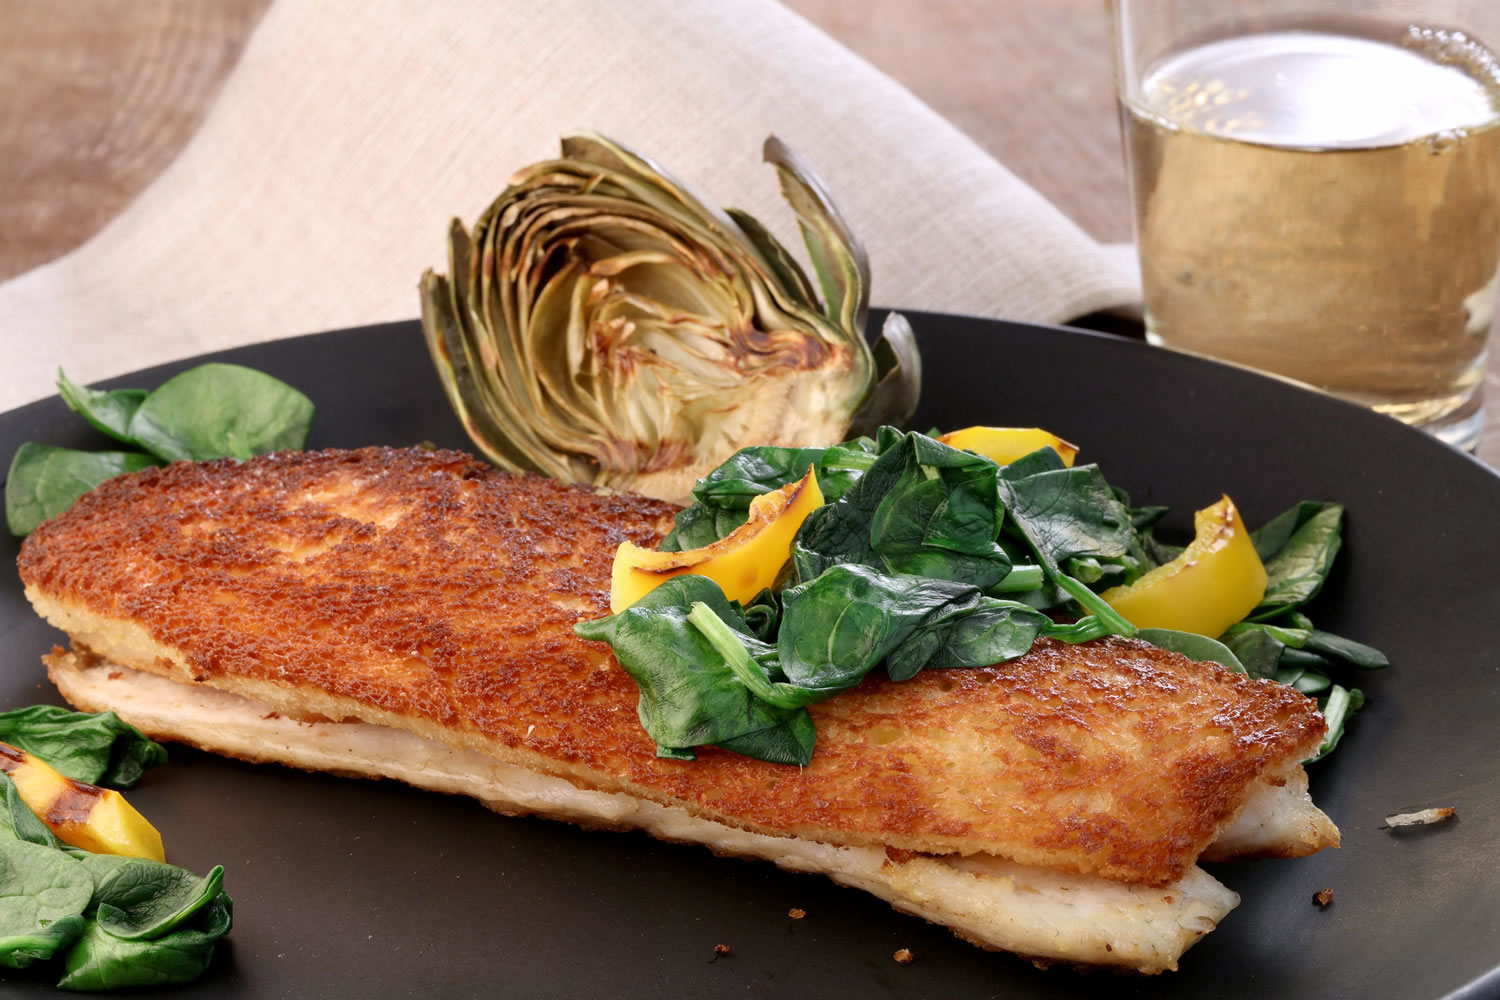 Branzino en croute is created by pan-frying fillets of the fish with planks of bread.